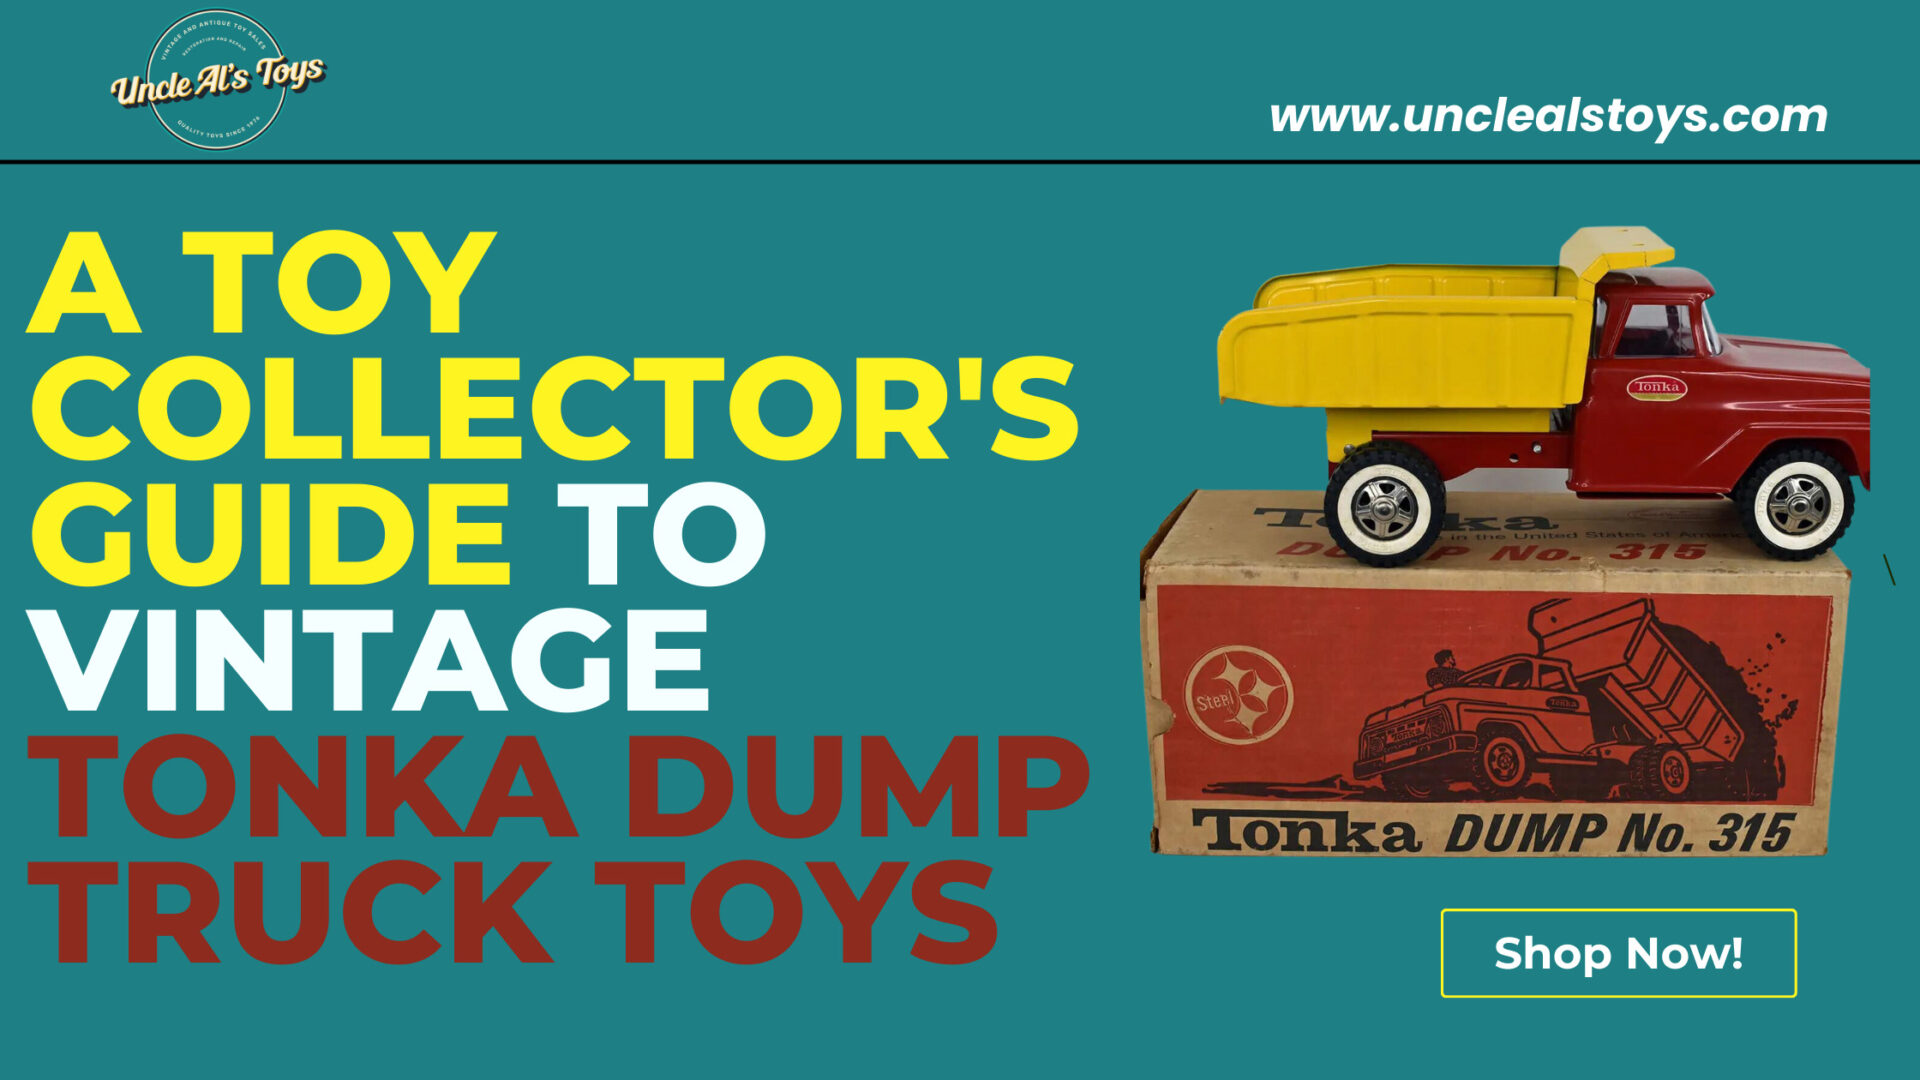 Tonka Dump Truck Toys Why They Re